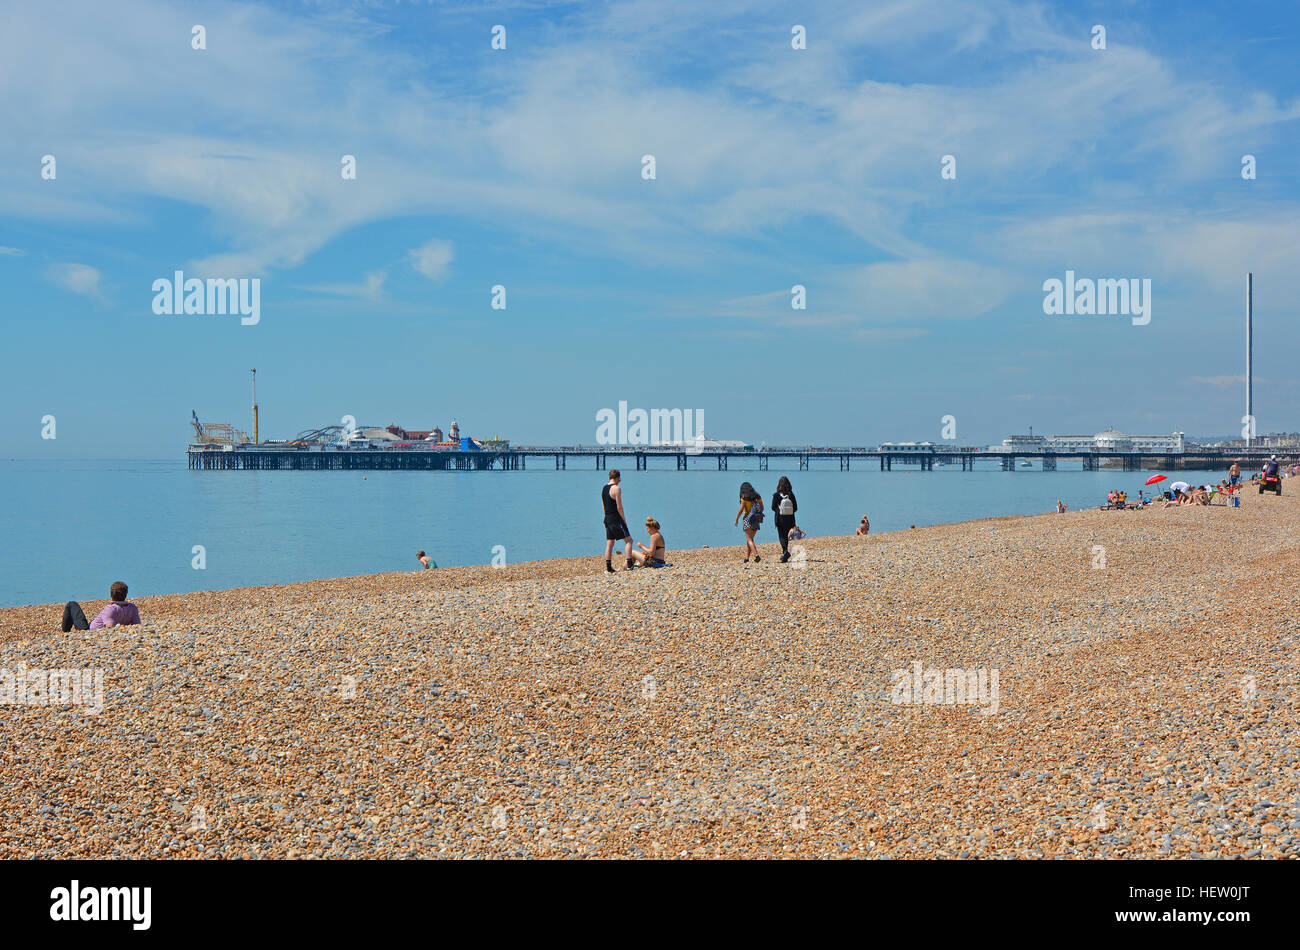 Seafront and shingle beach at Brighton in East Sussex, England. With pier and British Airways i360 observation tower. People on beach. Heat haze disto Stock Photo